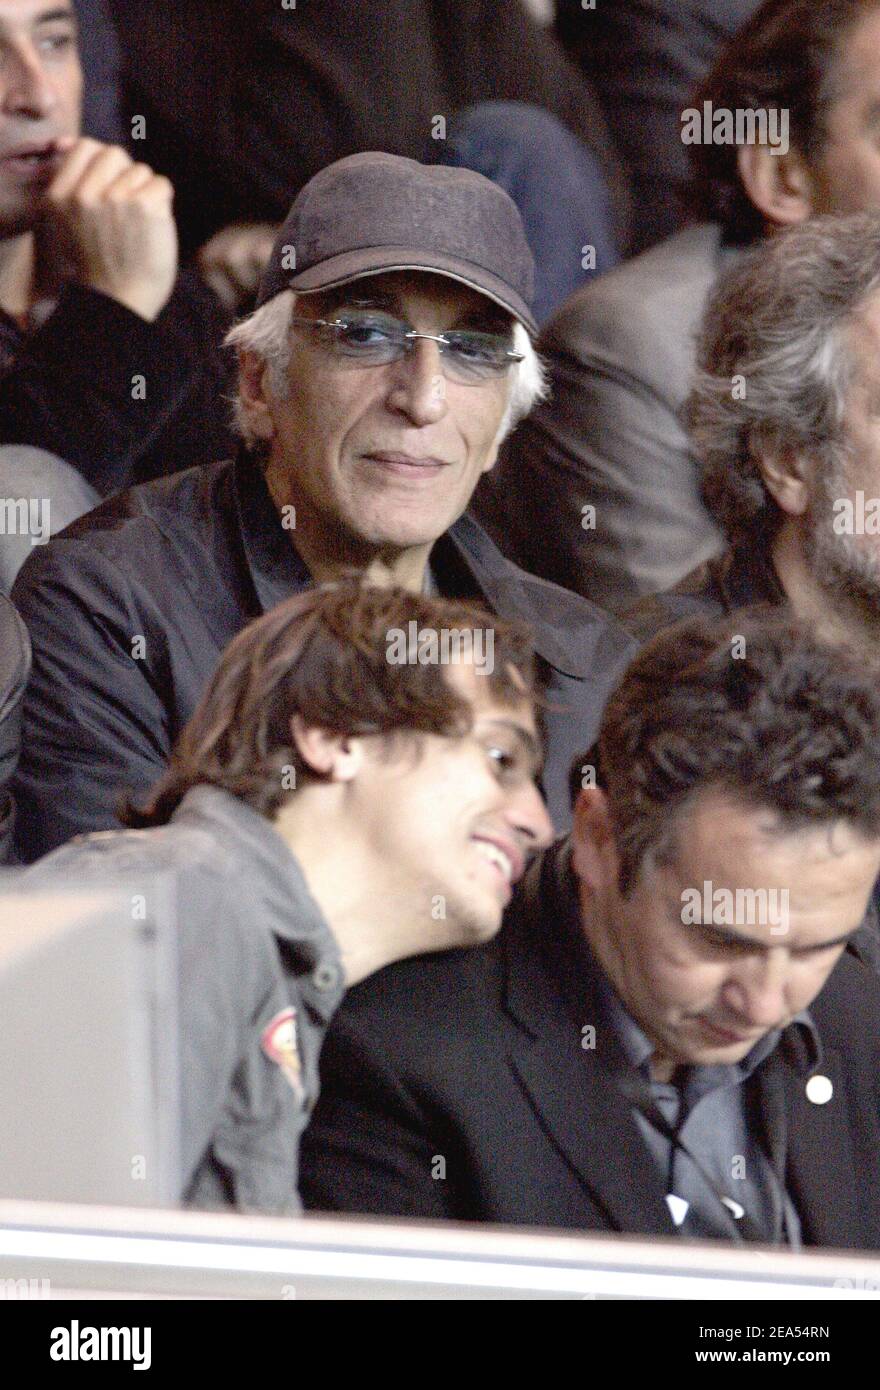 French actor Gerard Darmon watches soccer match of French championship between Paris Saint-Germain and Lille, (2-1) at the Parc des Princes stadium, in Paris, France, on September 21, 2005. Photo by Laurent Zabulon/ABACAPRESS.COM Stock Photo